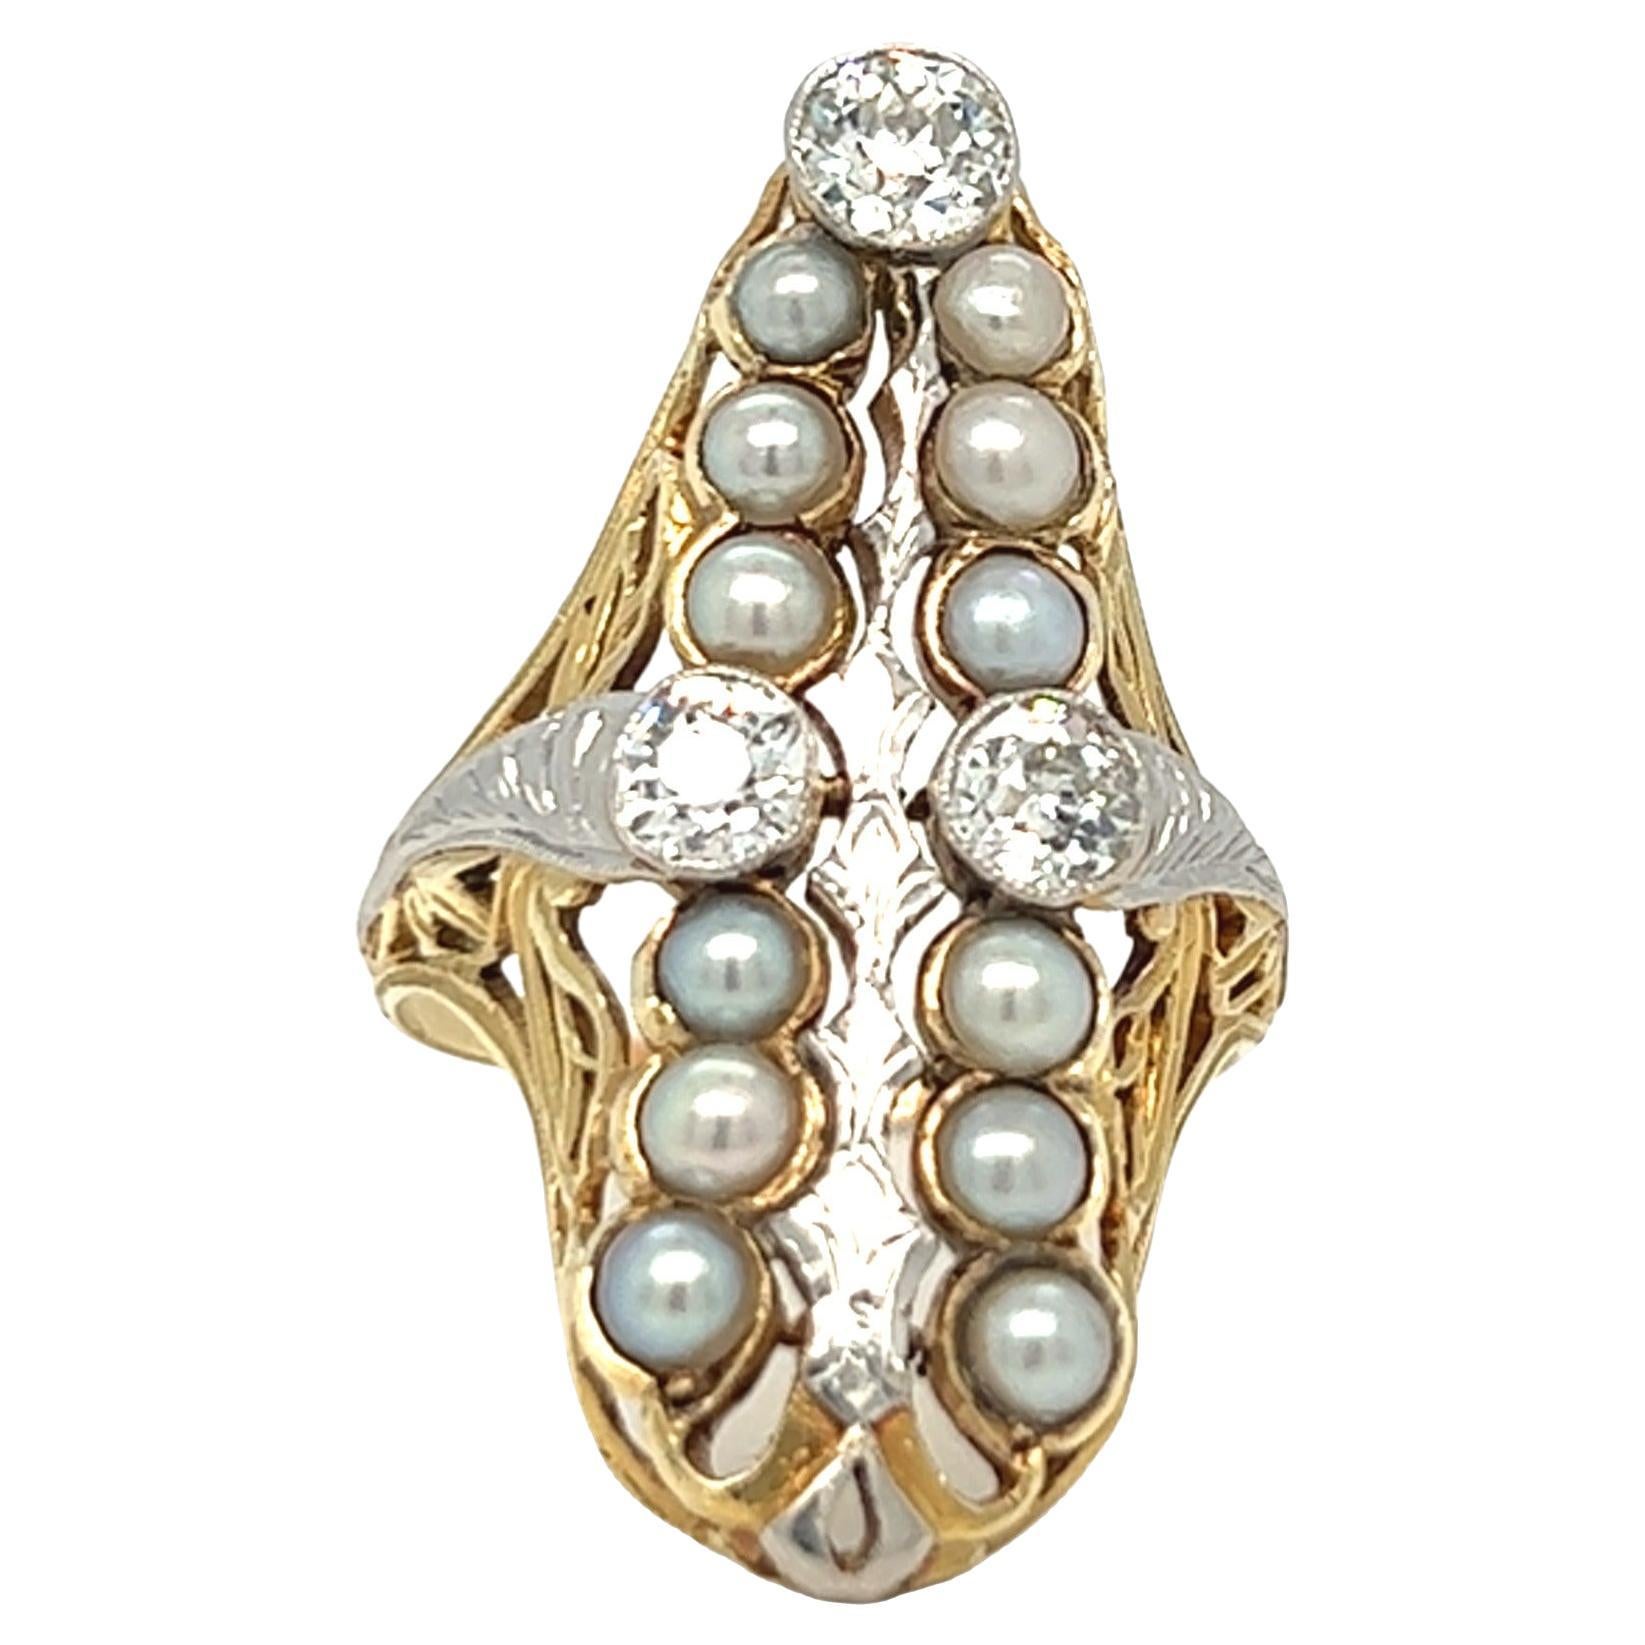 Antique Pearl and Diamond Navette Shield Ring 14K Yellow Gold Ring